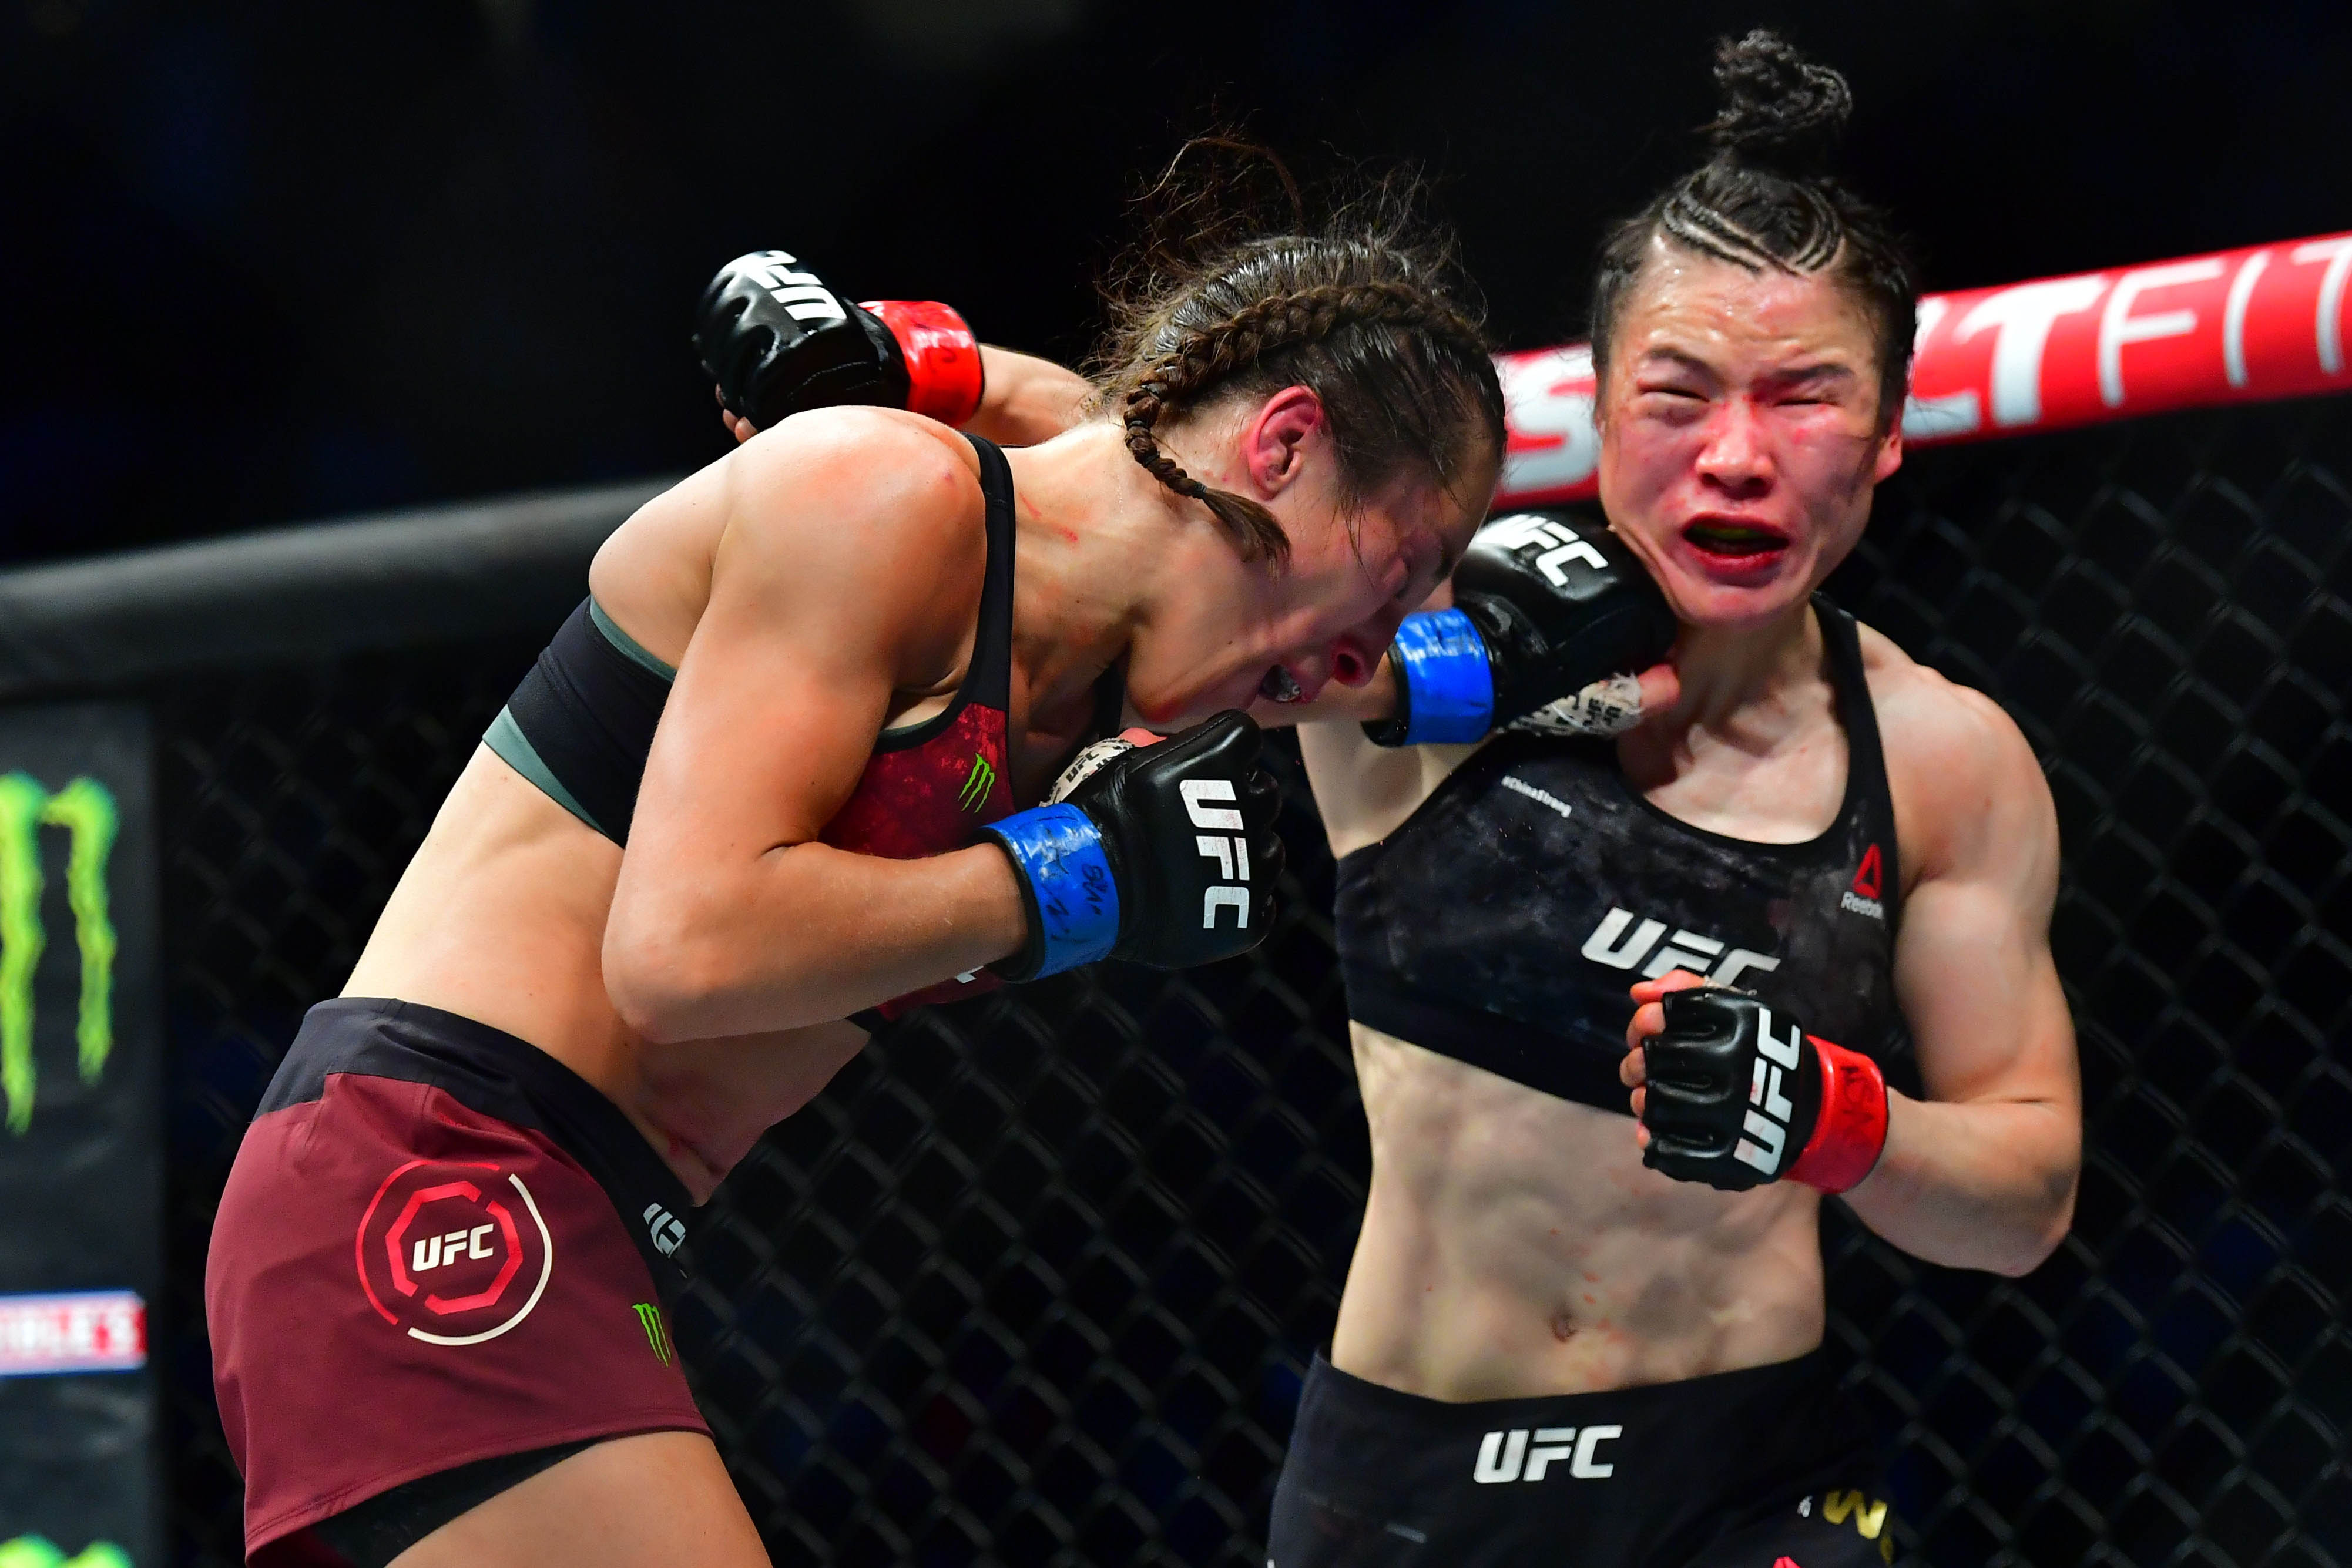 Weili Zhang (red gloves) fights Joanna Jedrzejczyk (blue gloves) during UFC 248 at T-Mobile Arena.